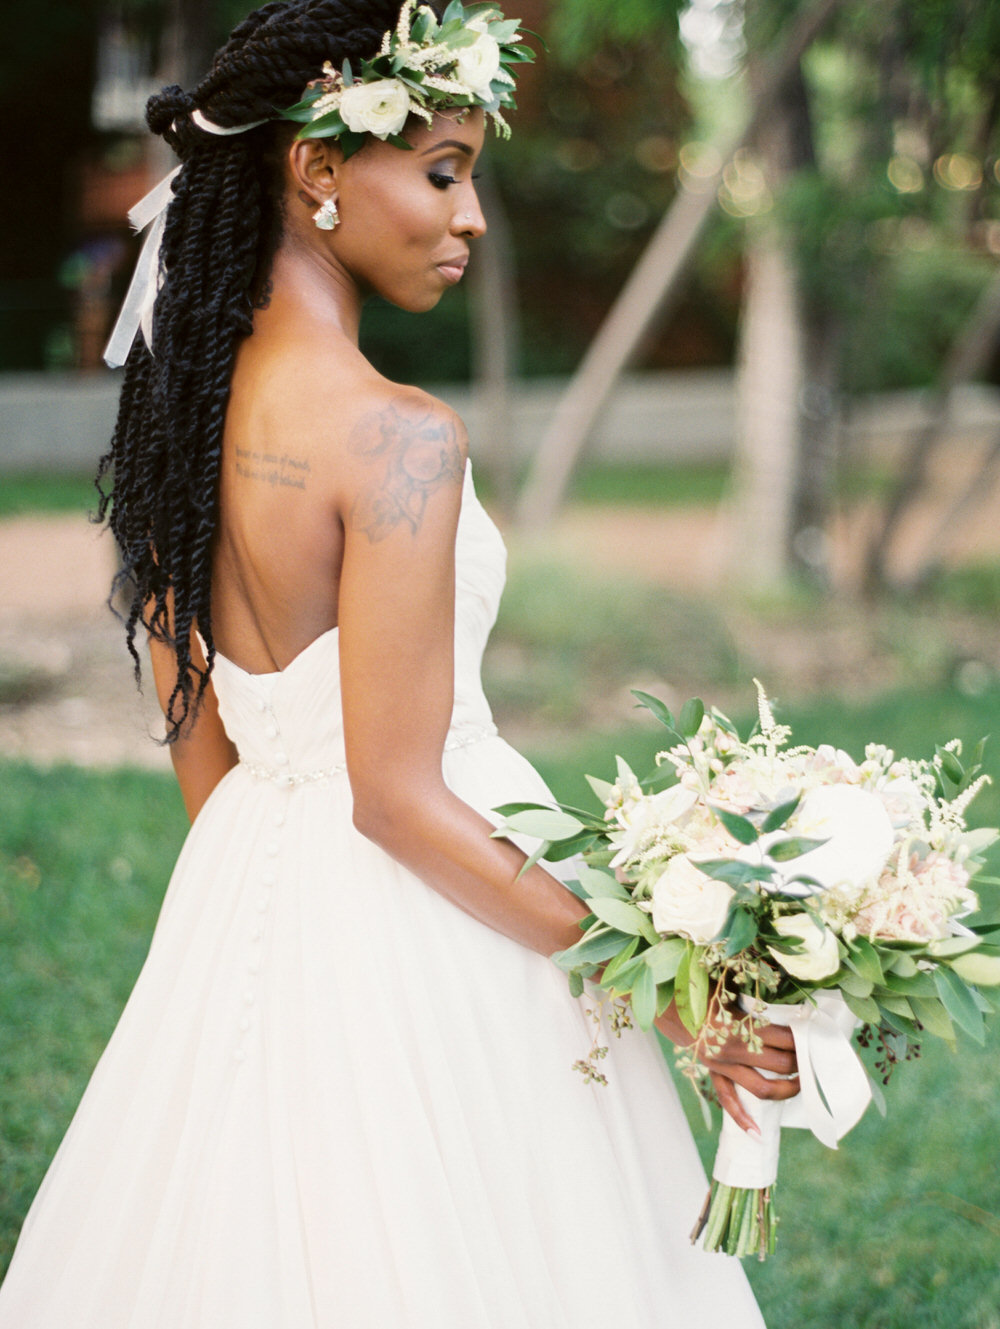 30 Wedding Hairstyles with Braids We'e Loving Right Now ⋆ Ruffled